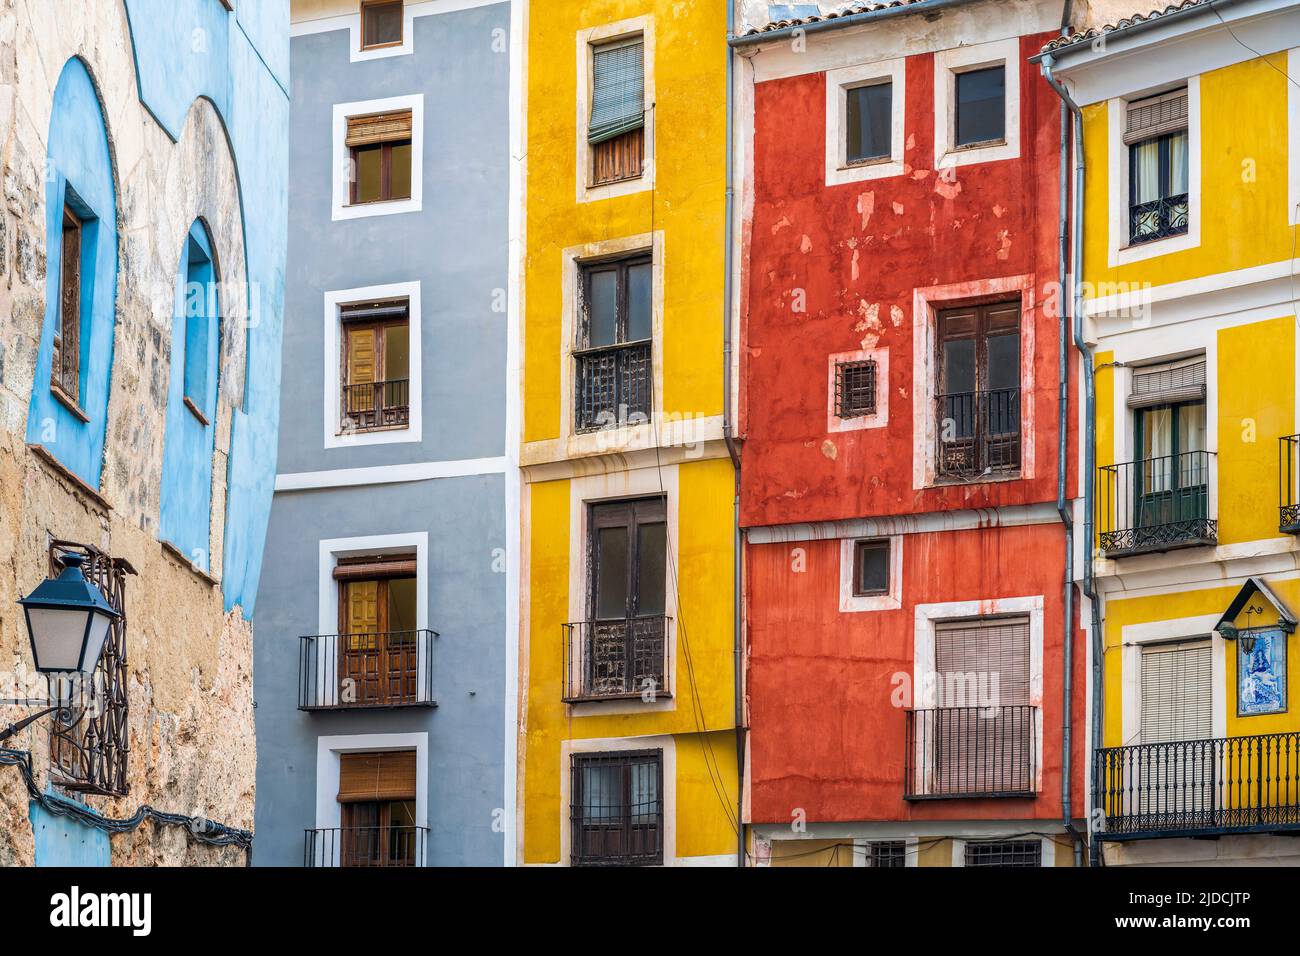 Colorful houses in the old town, Cuenca, Castilla-La Mancha, Spain Stock Photo